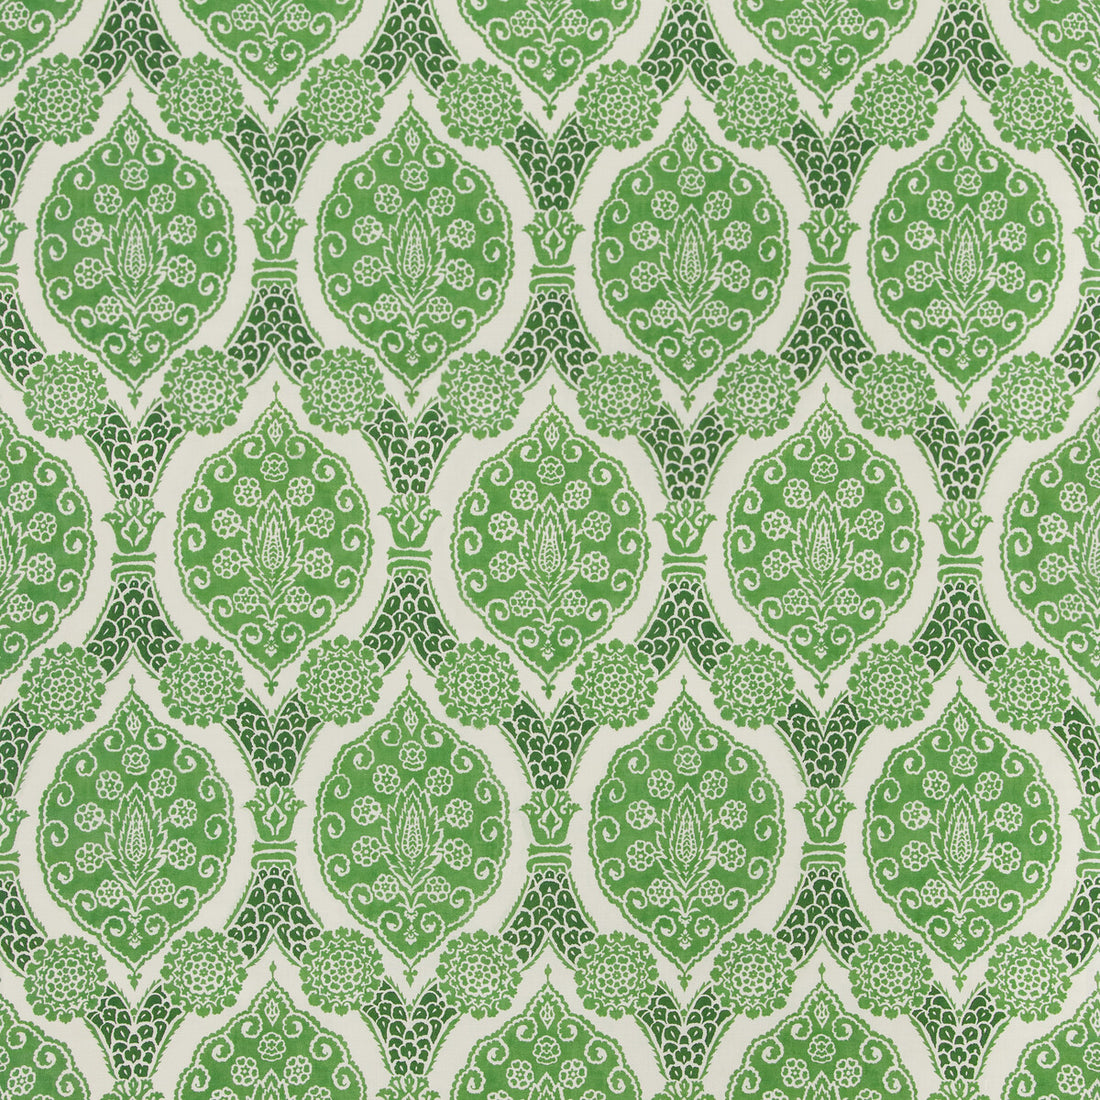 Sufera Print fabric in leaf color - pattern 8020103.3.0 - by Brunschwig &amp; Fils in the Grand Bazaar collection